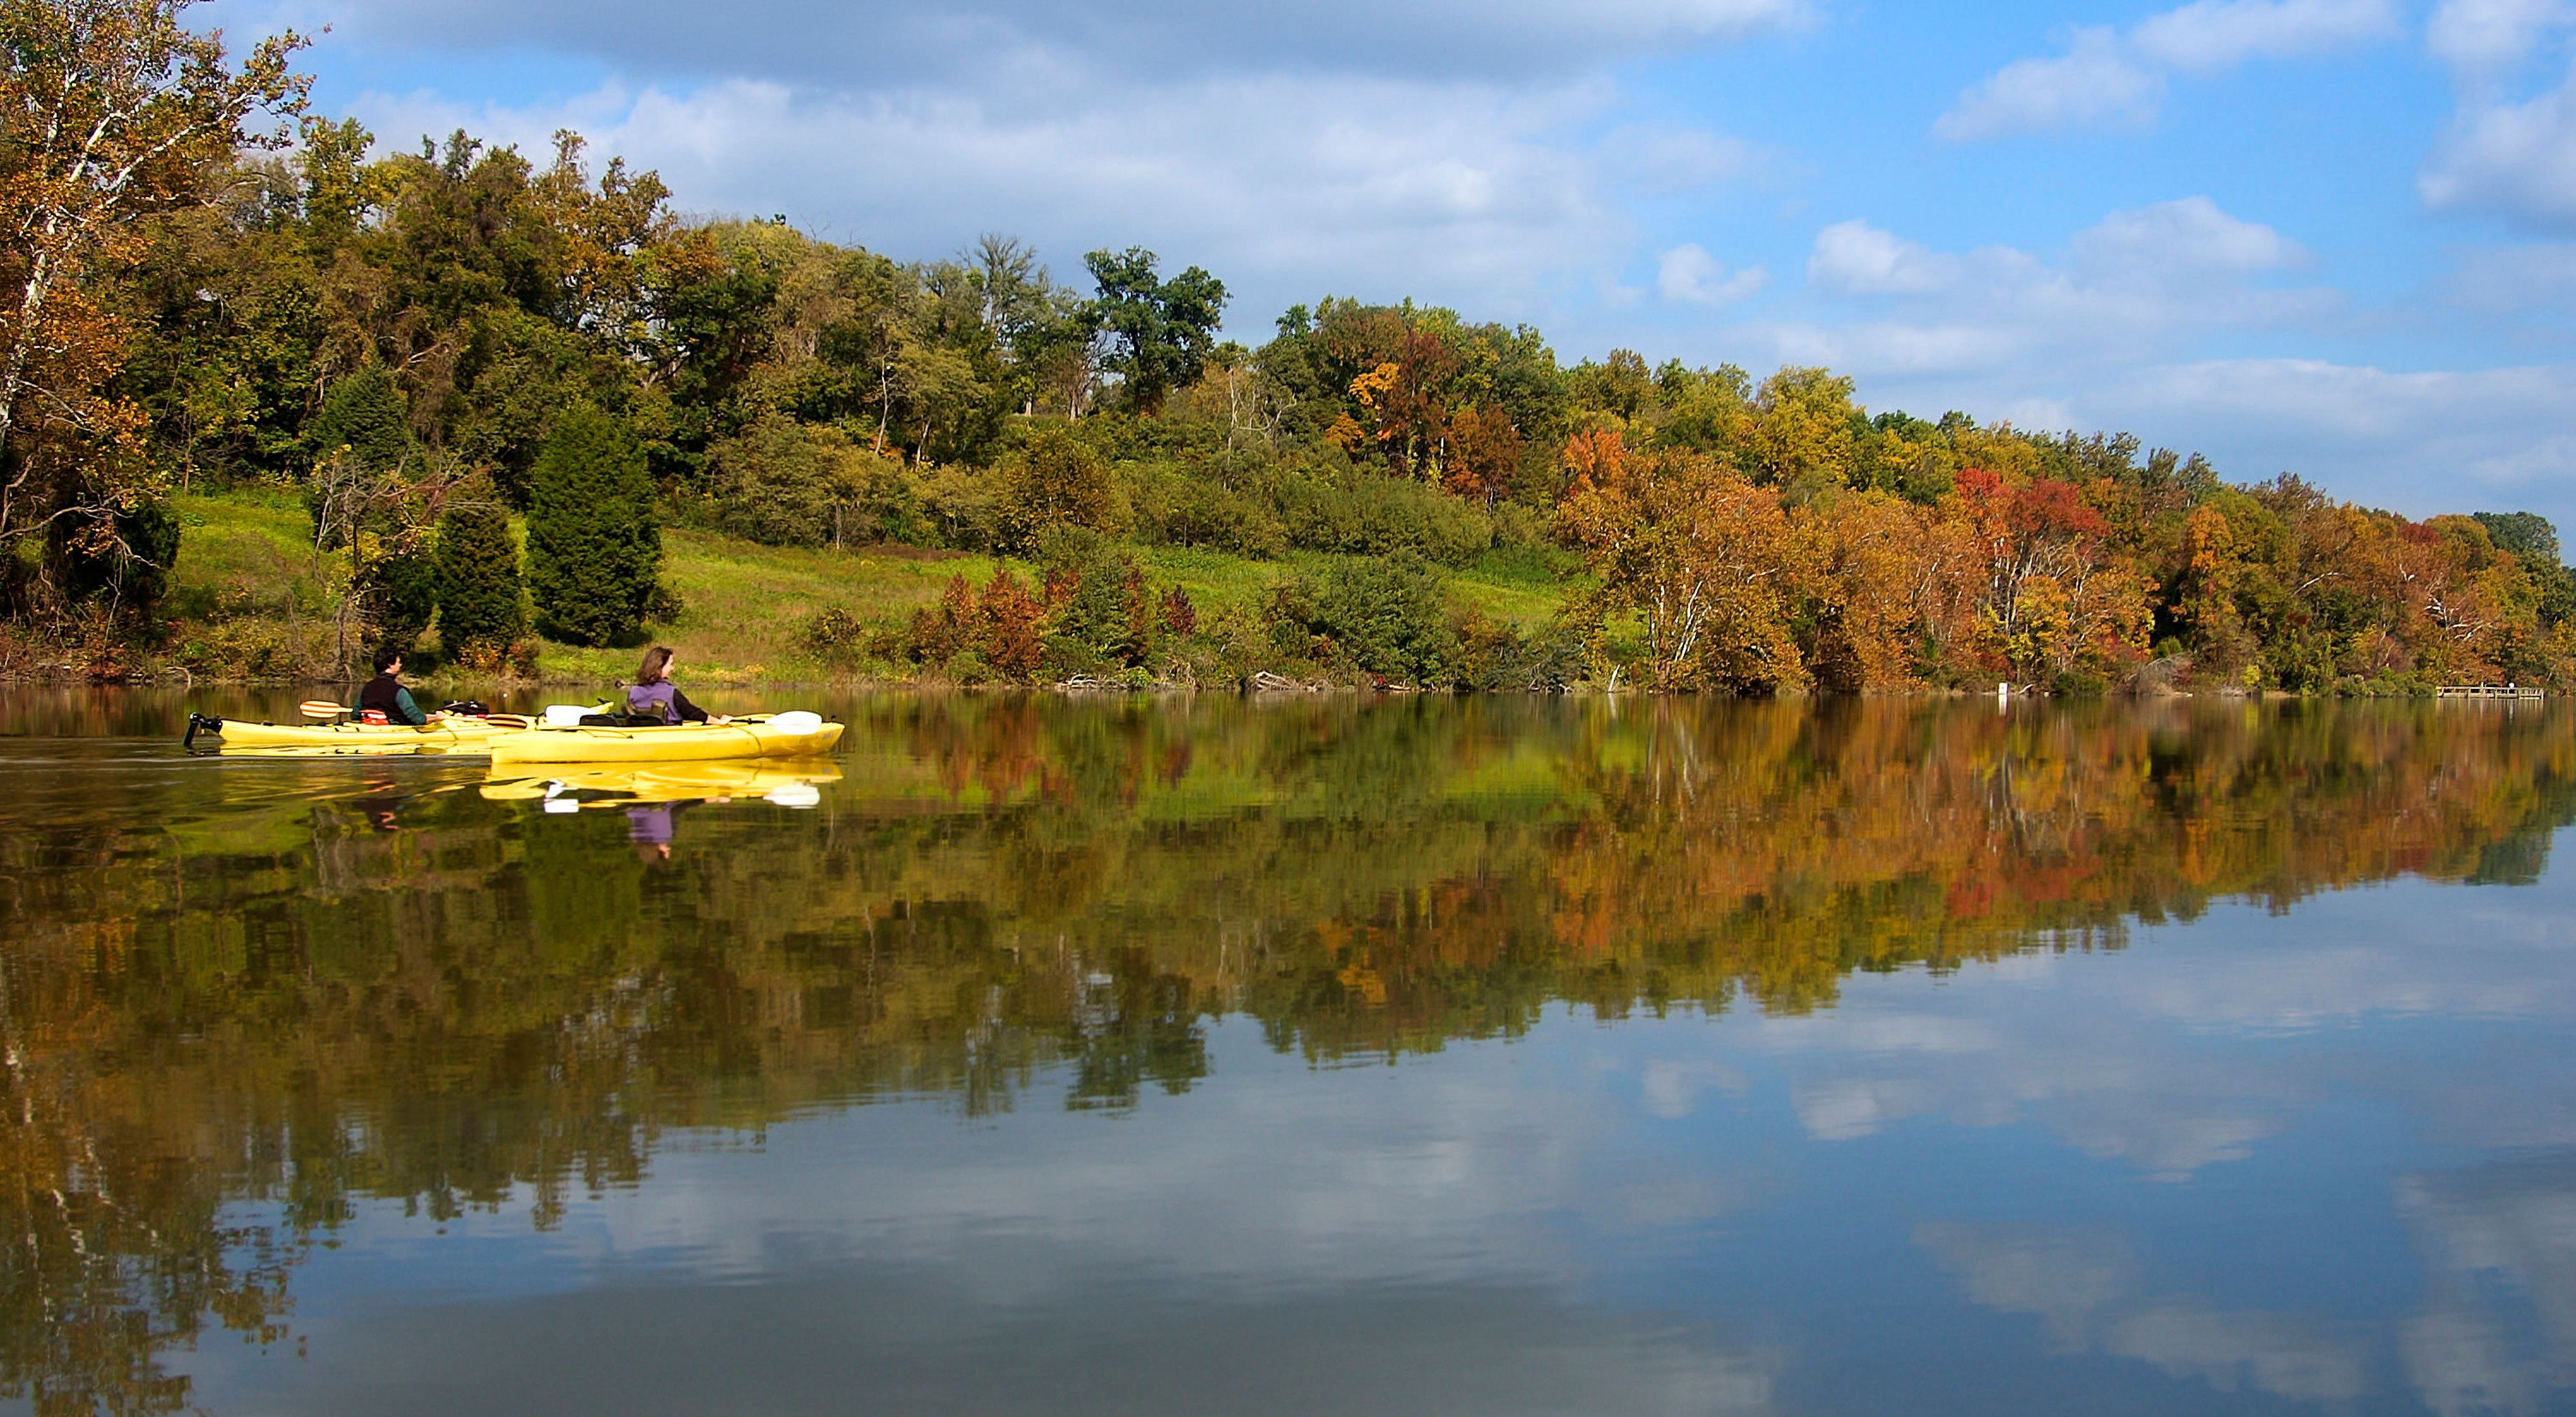 Two people in yellow kayaks float together down Nanjemoy Creek. The smooth, flat water reflects the autumn colors of the trees that line the creek bank.